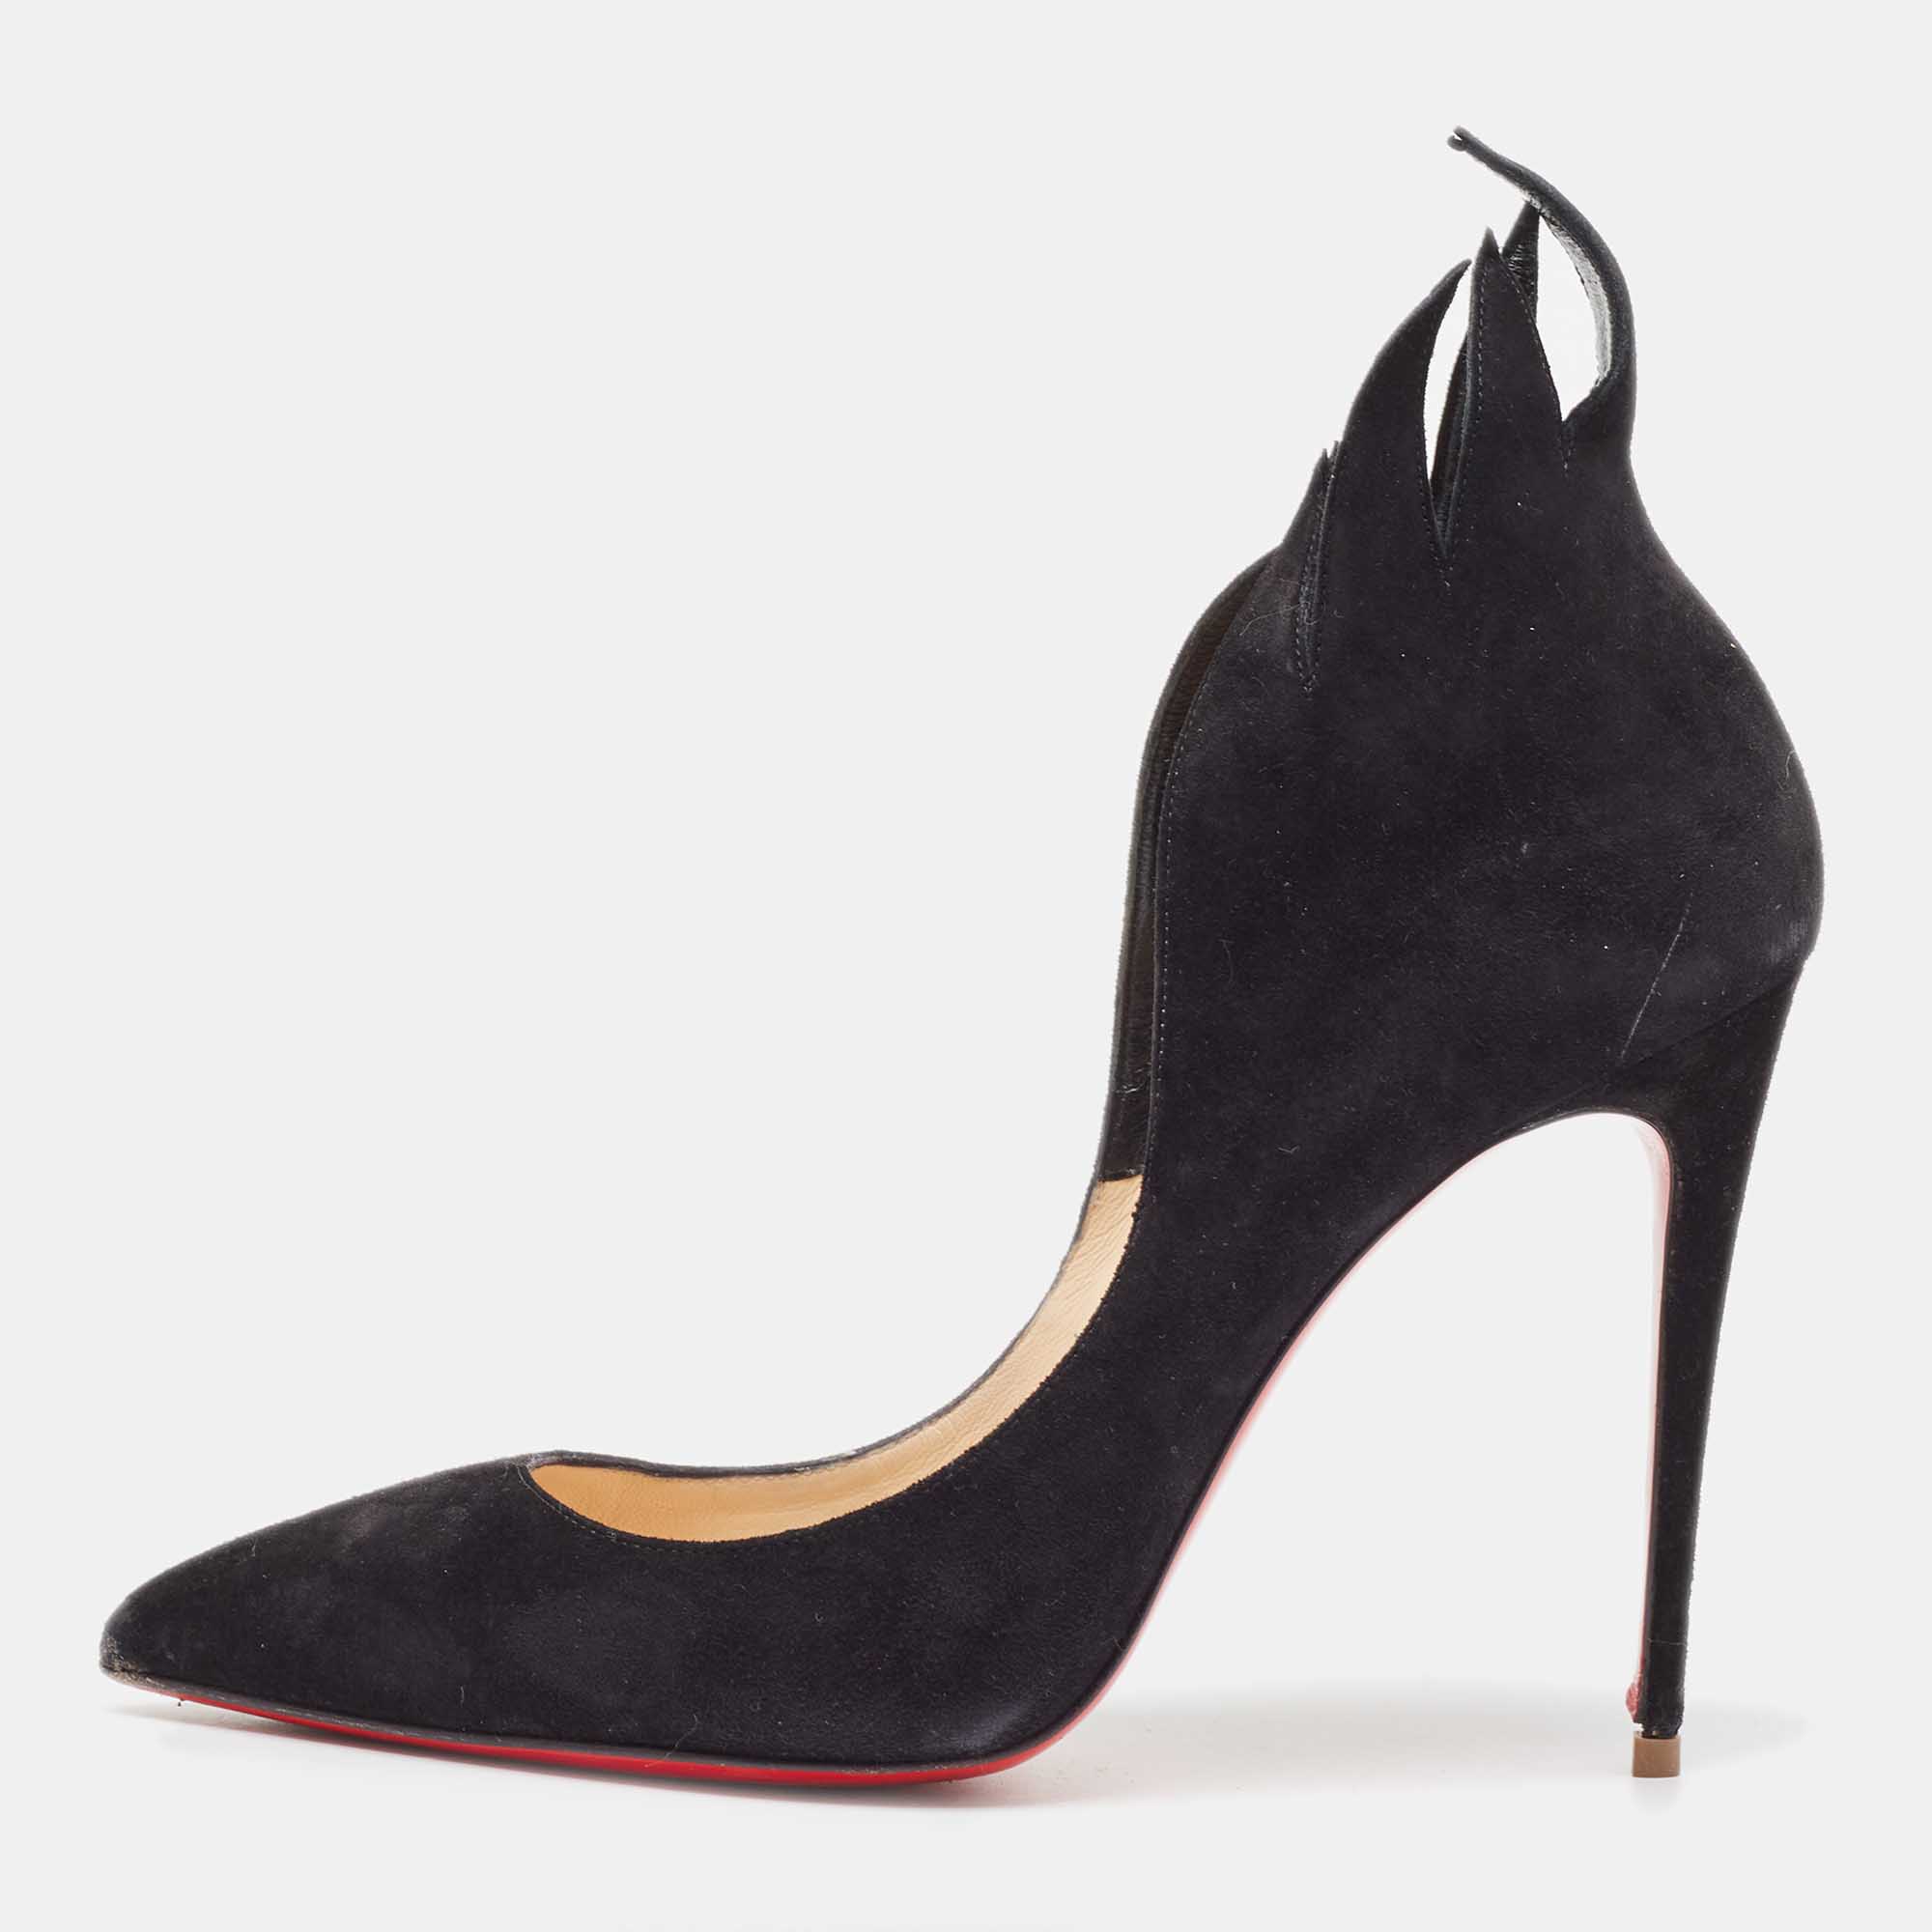 Pre-owned Christian Louboutin Black Suede Victorina Pumps Size 37.5